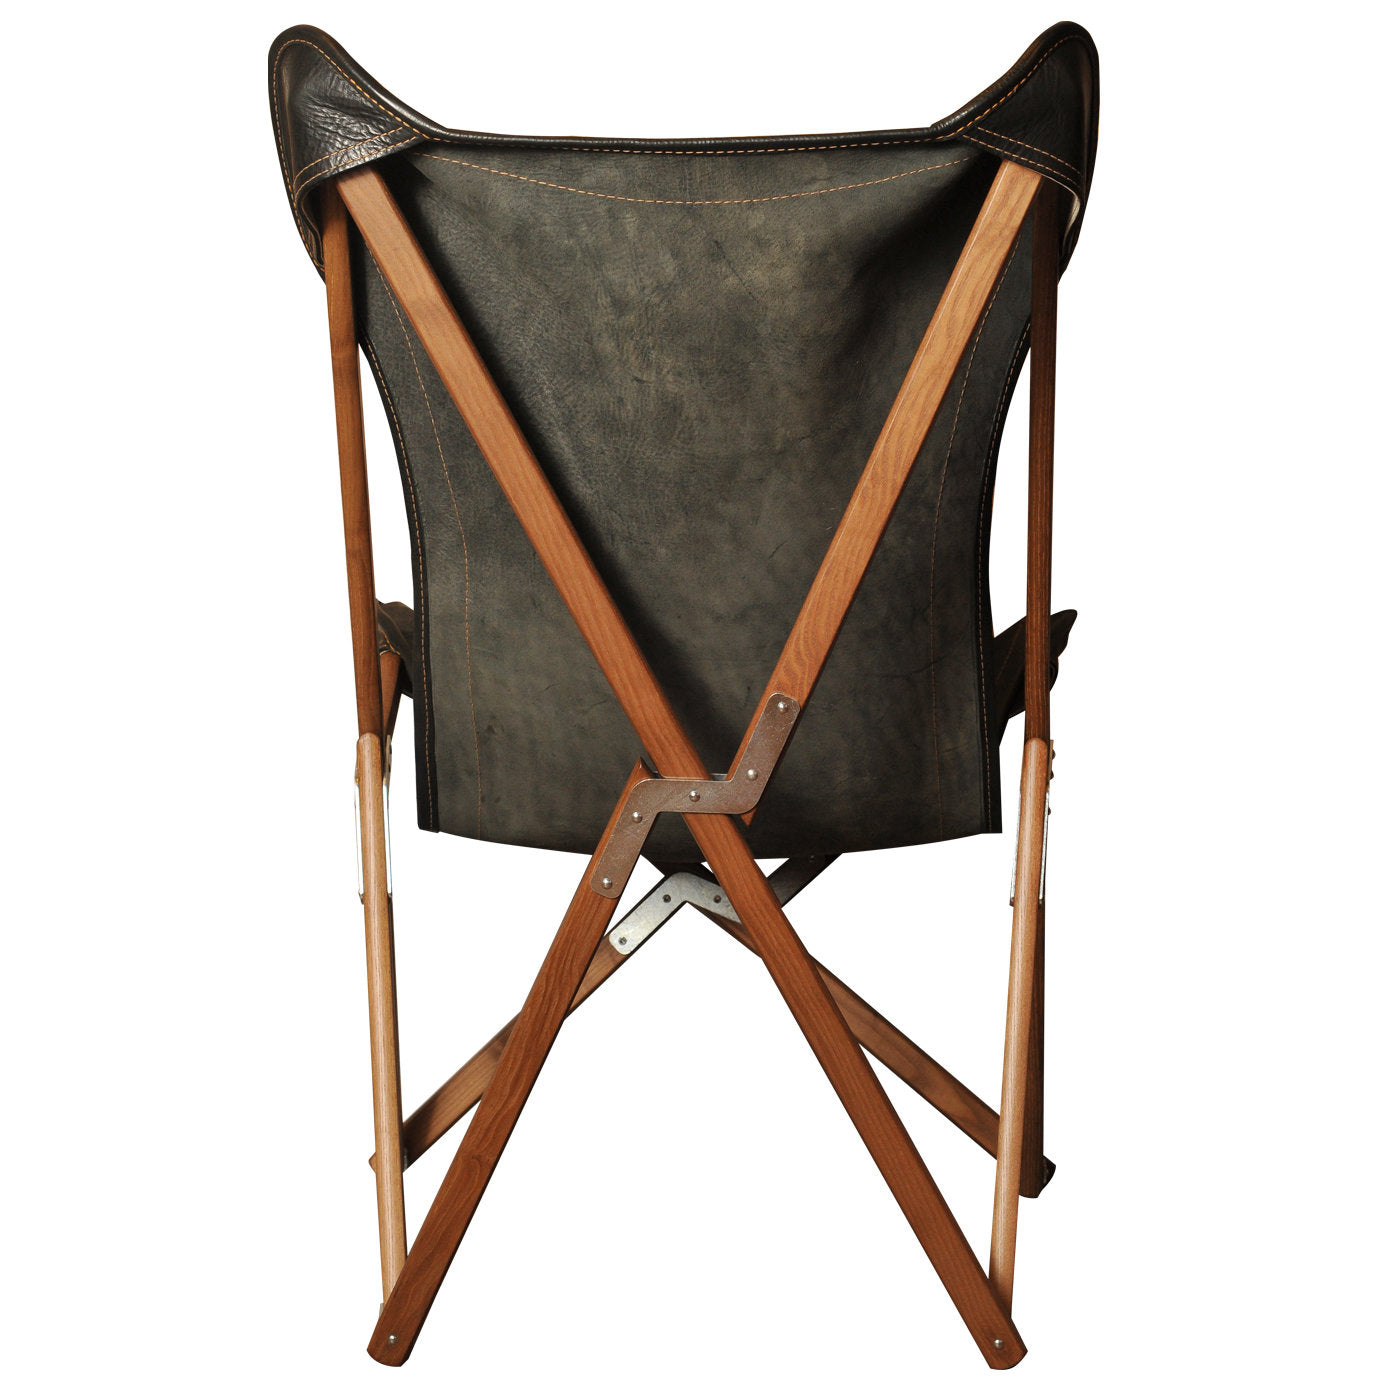 Black Leather Tripolina chair - Alternative view 2